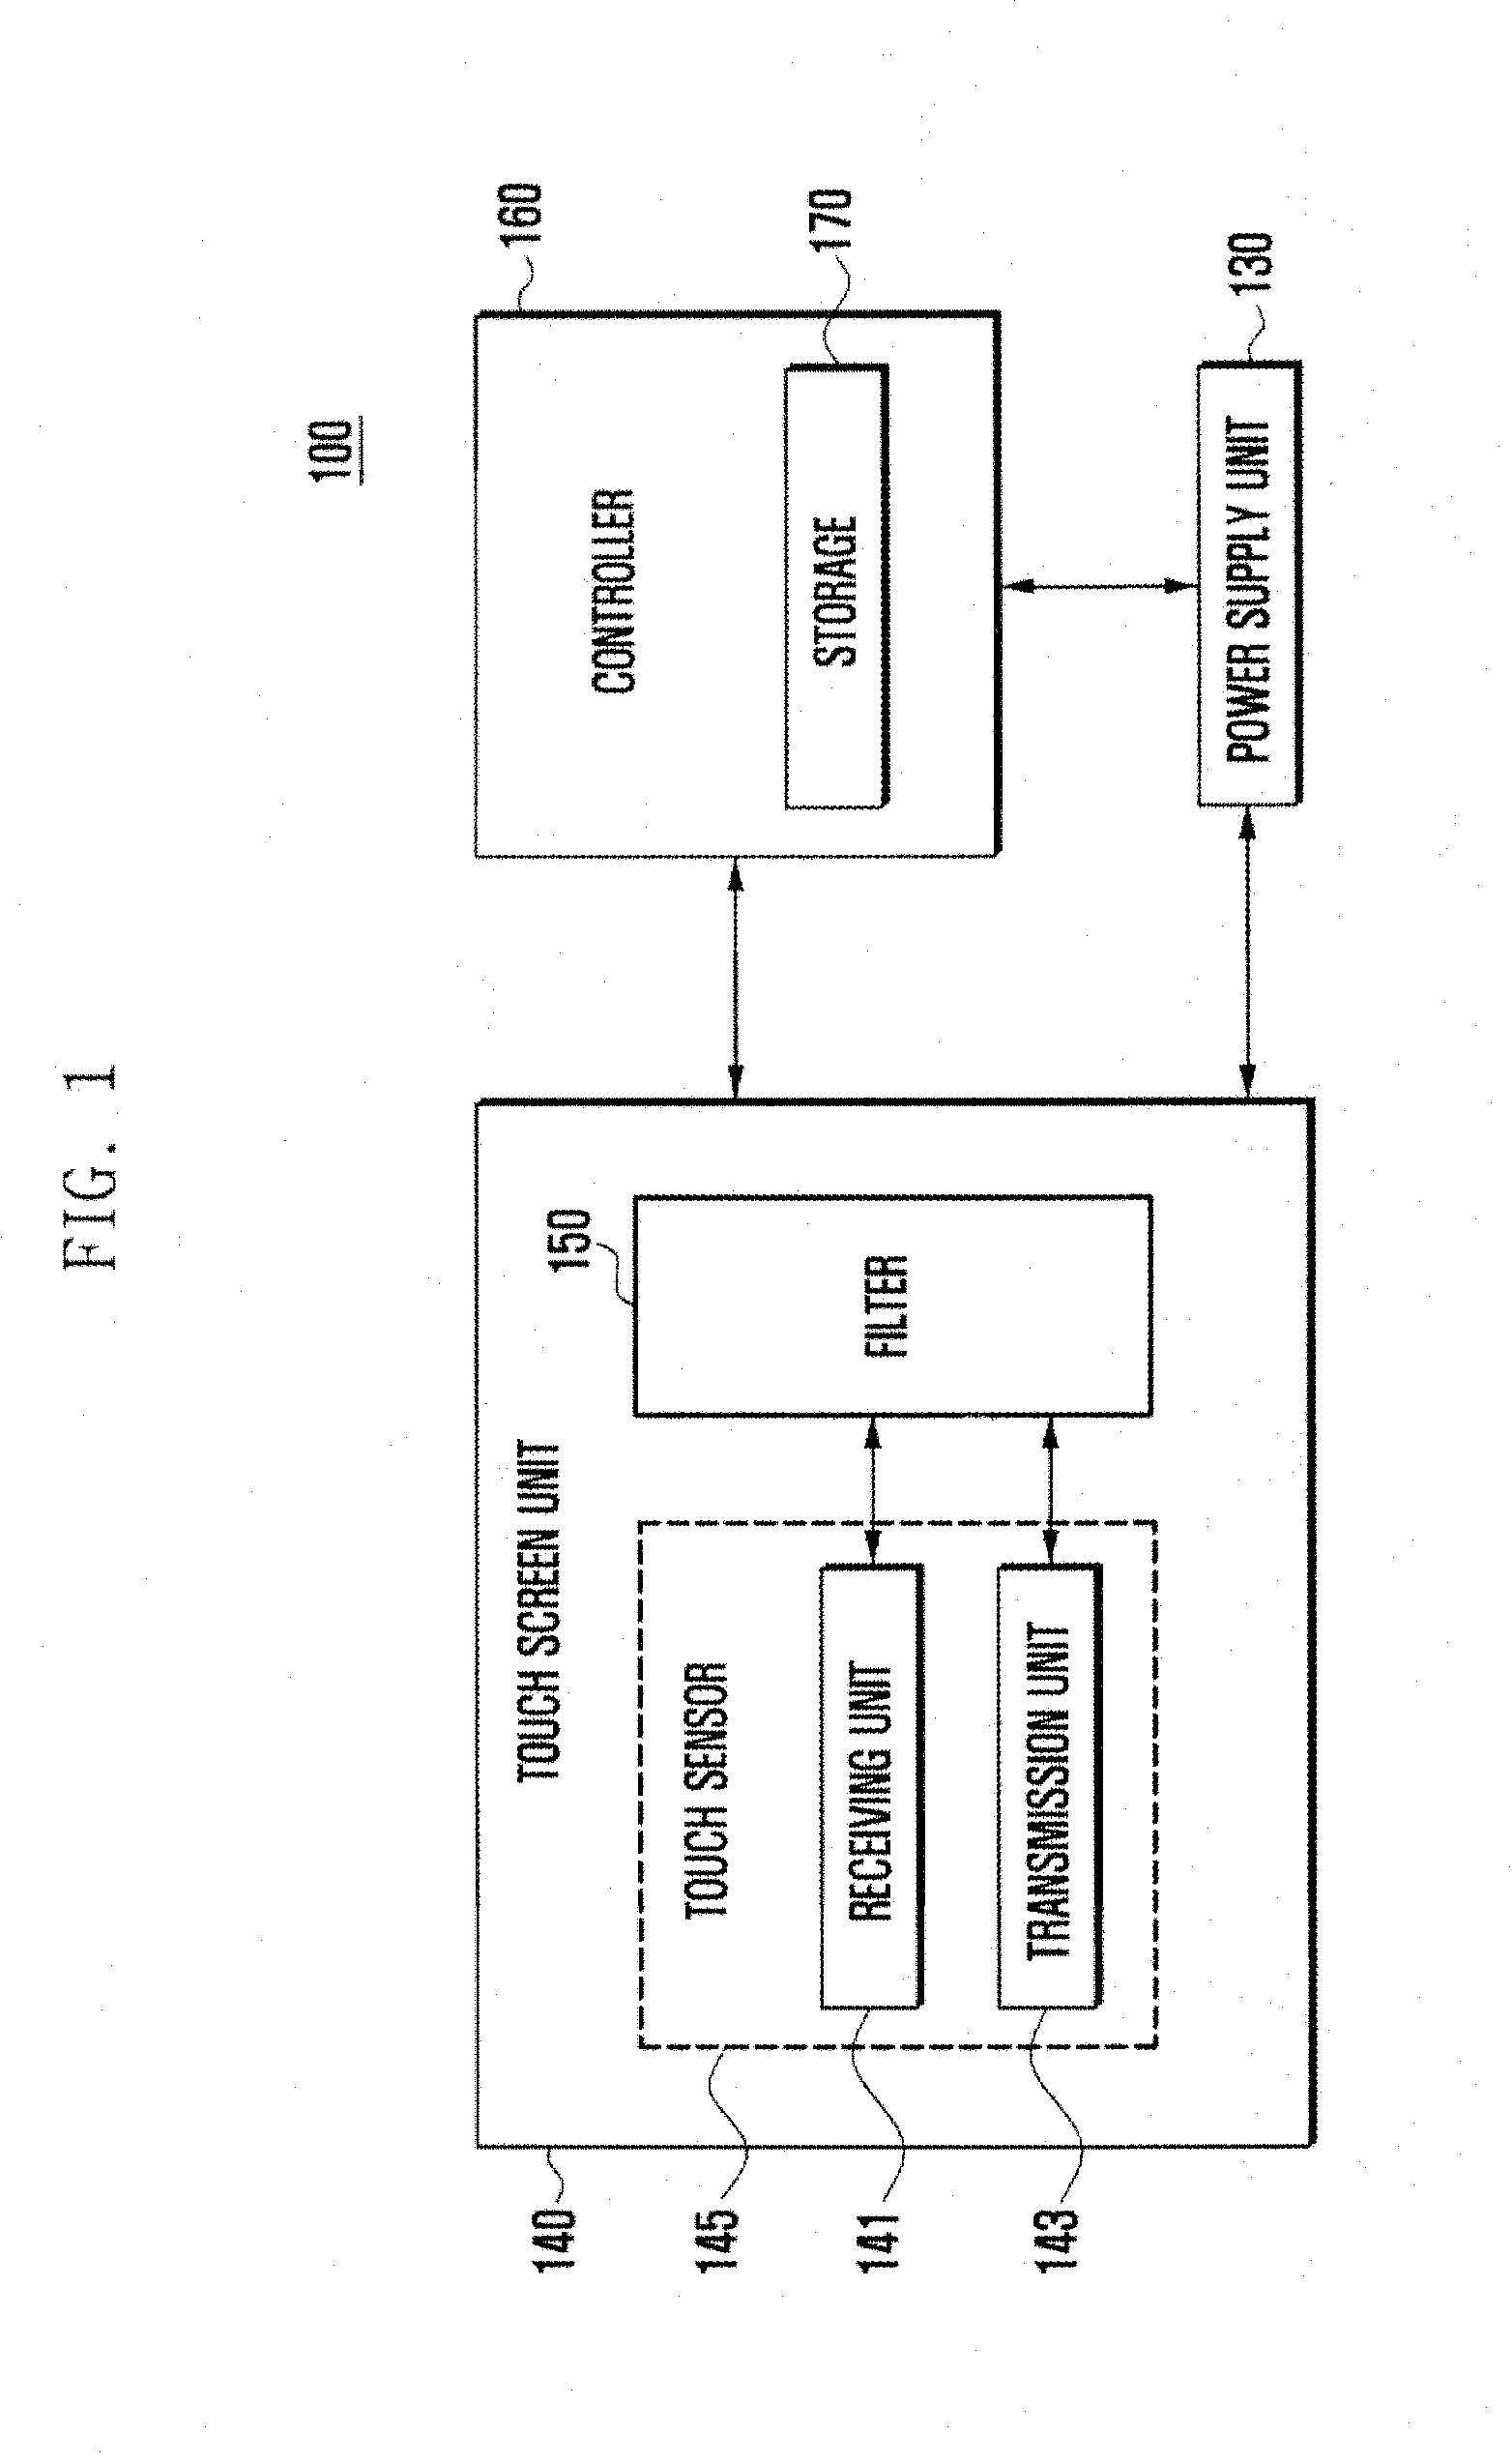 Electronic pen input recognition apparatus and method using c-type touch screen panel (TSP)